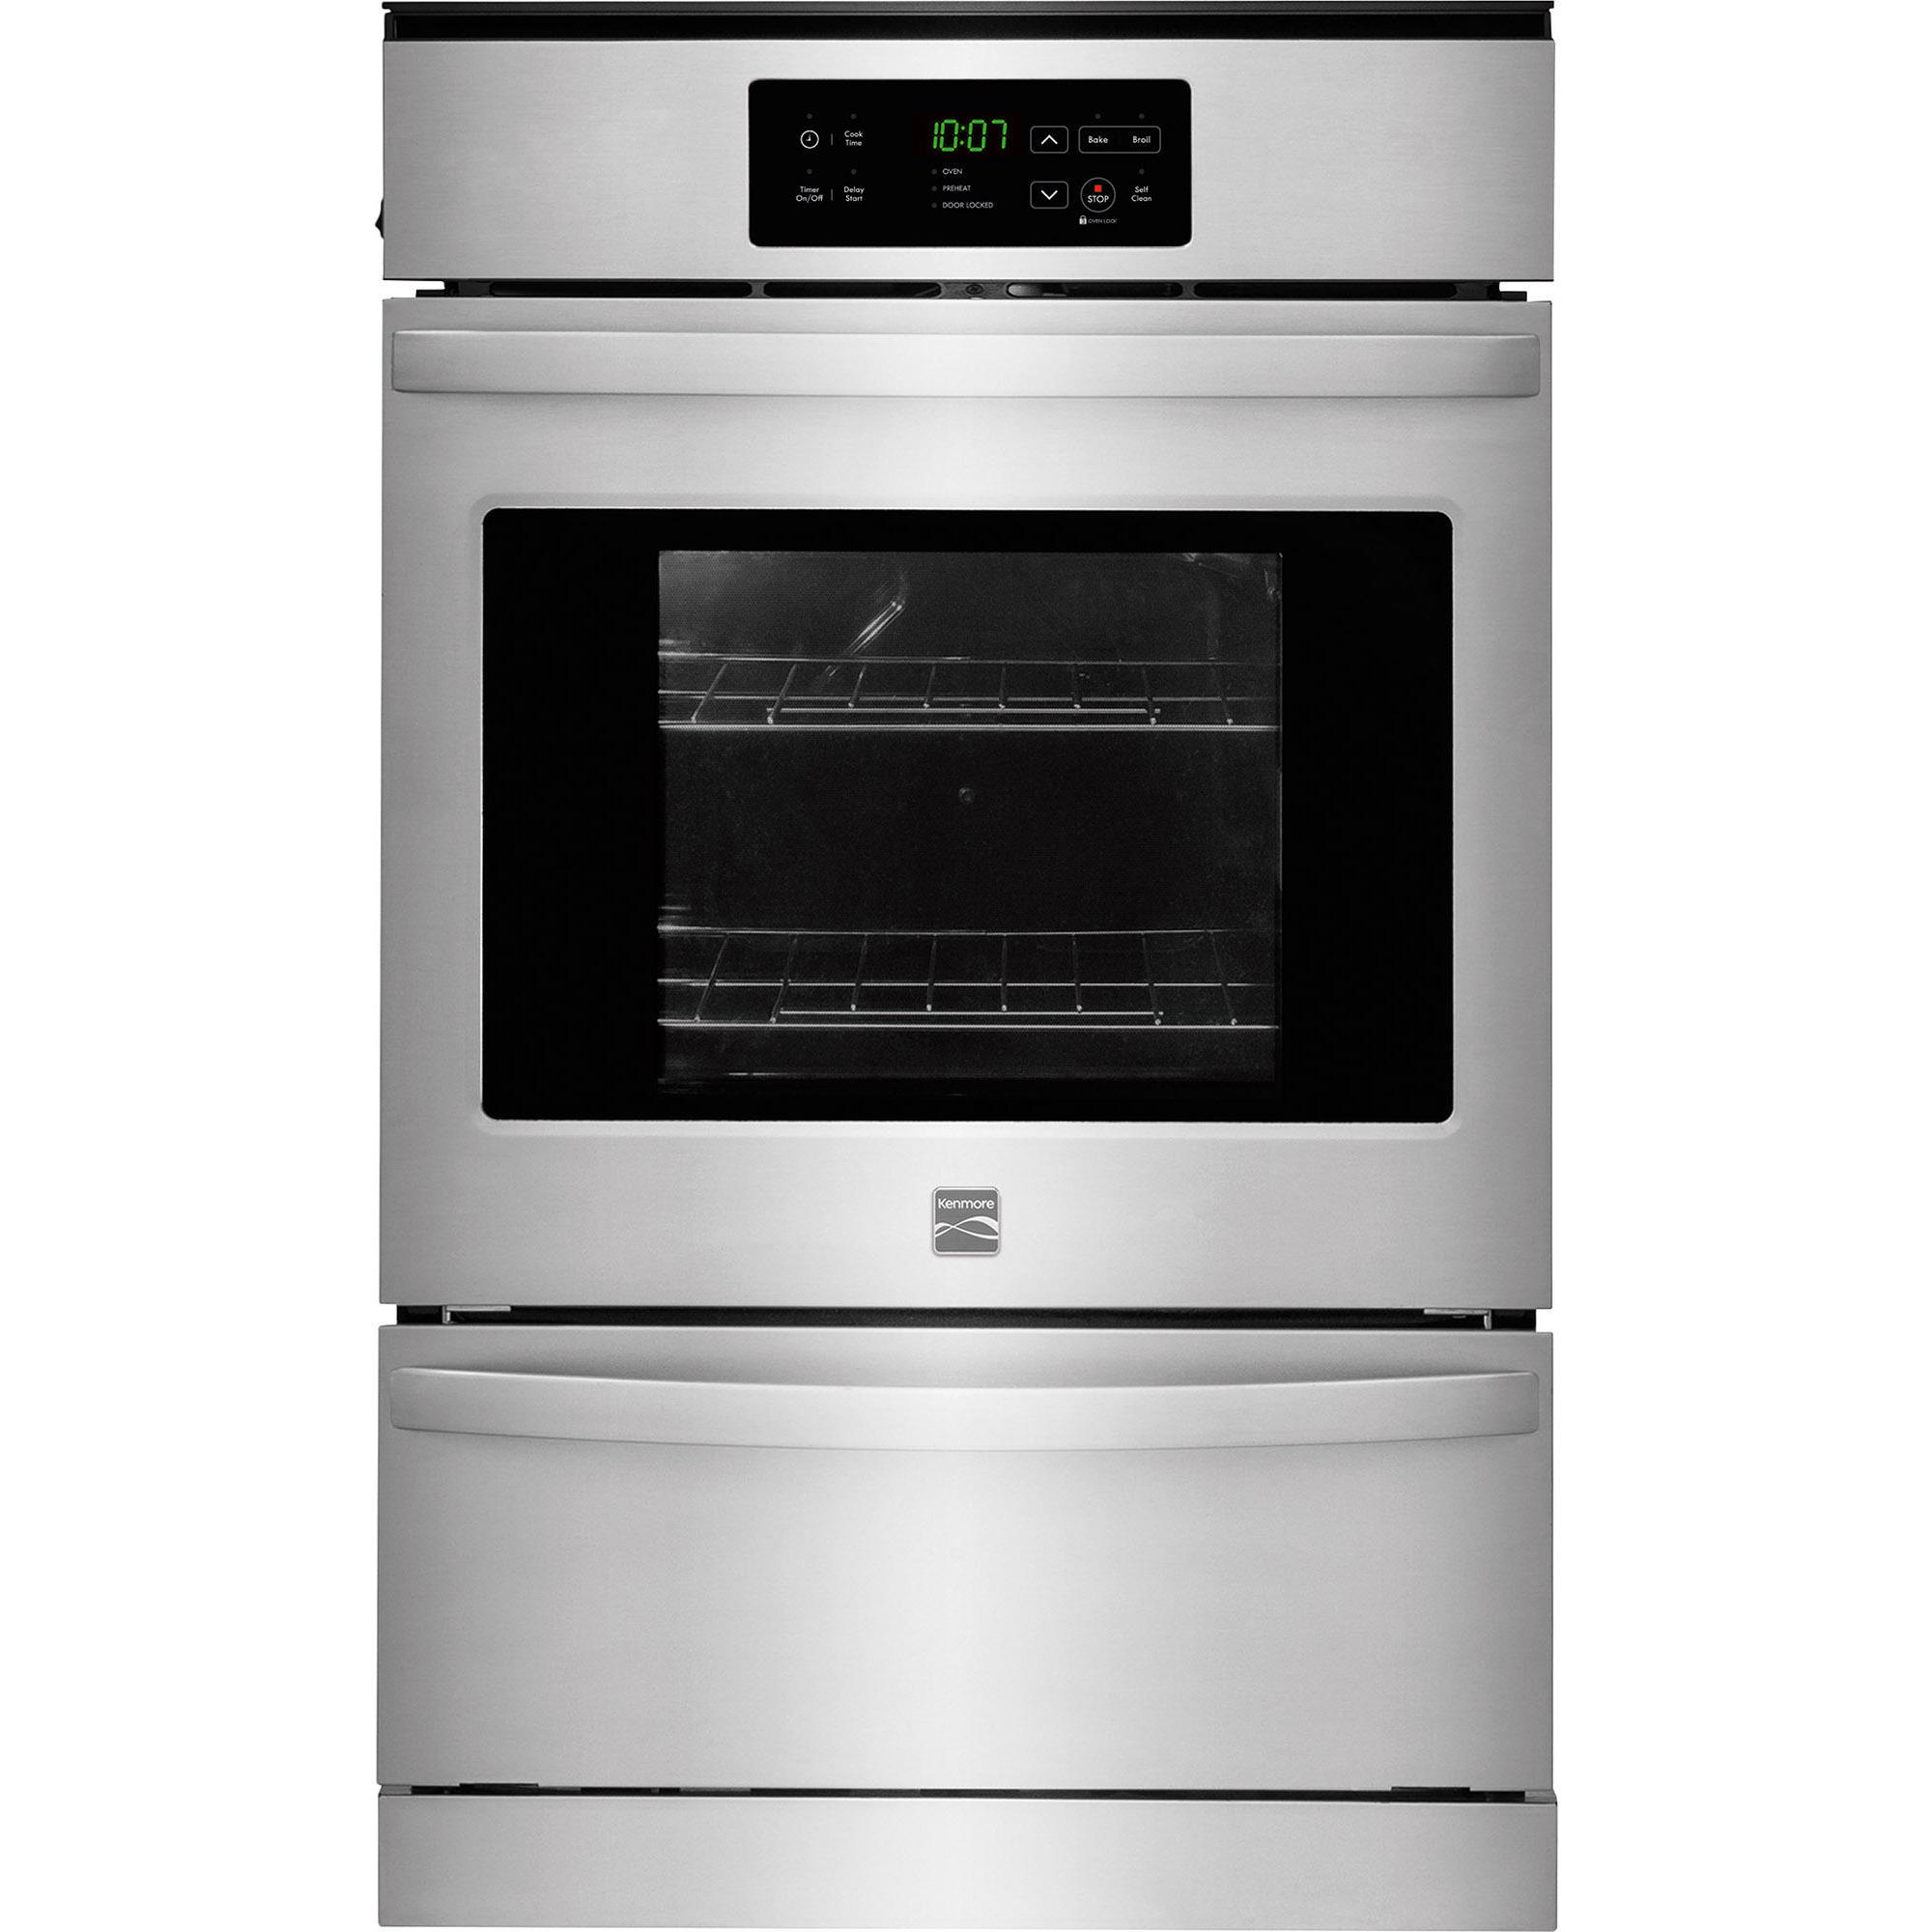 Kenmore 40303 24" Gas Wall Oven - Stainless Steel 24 Inch Gas Wall Oven Stainless Steel